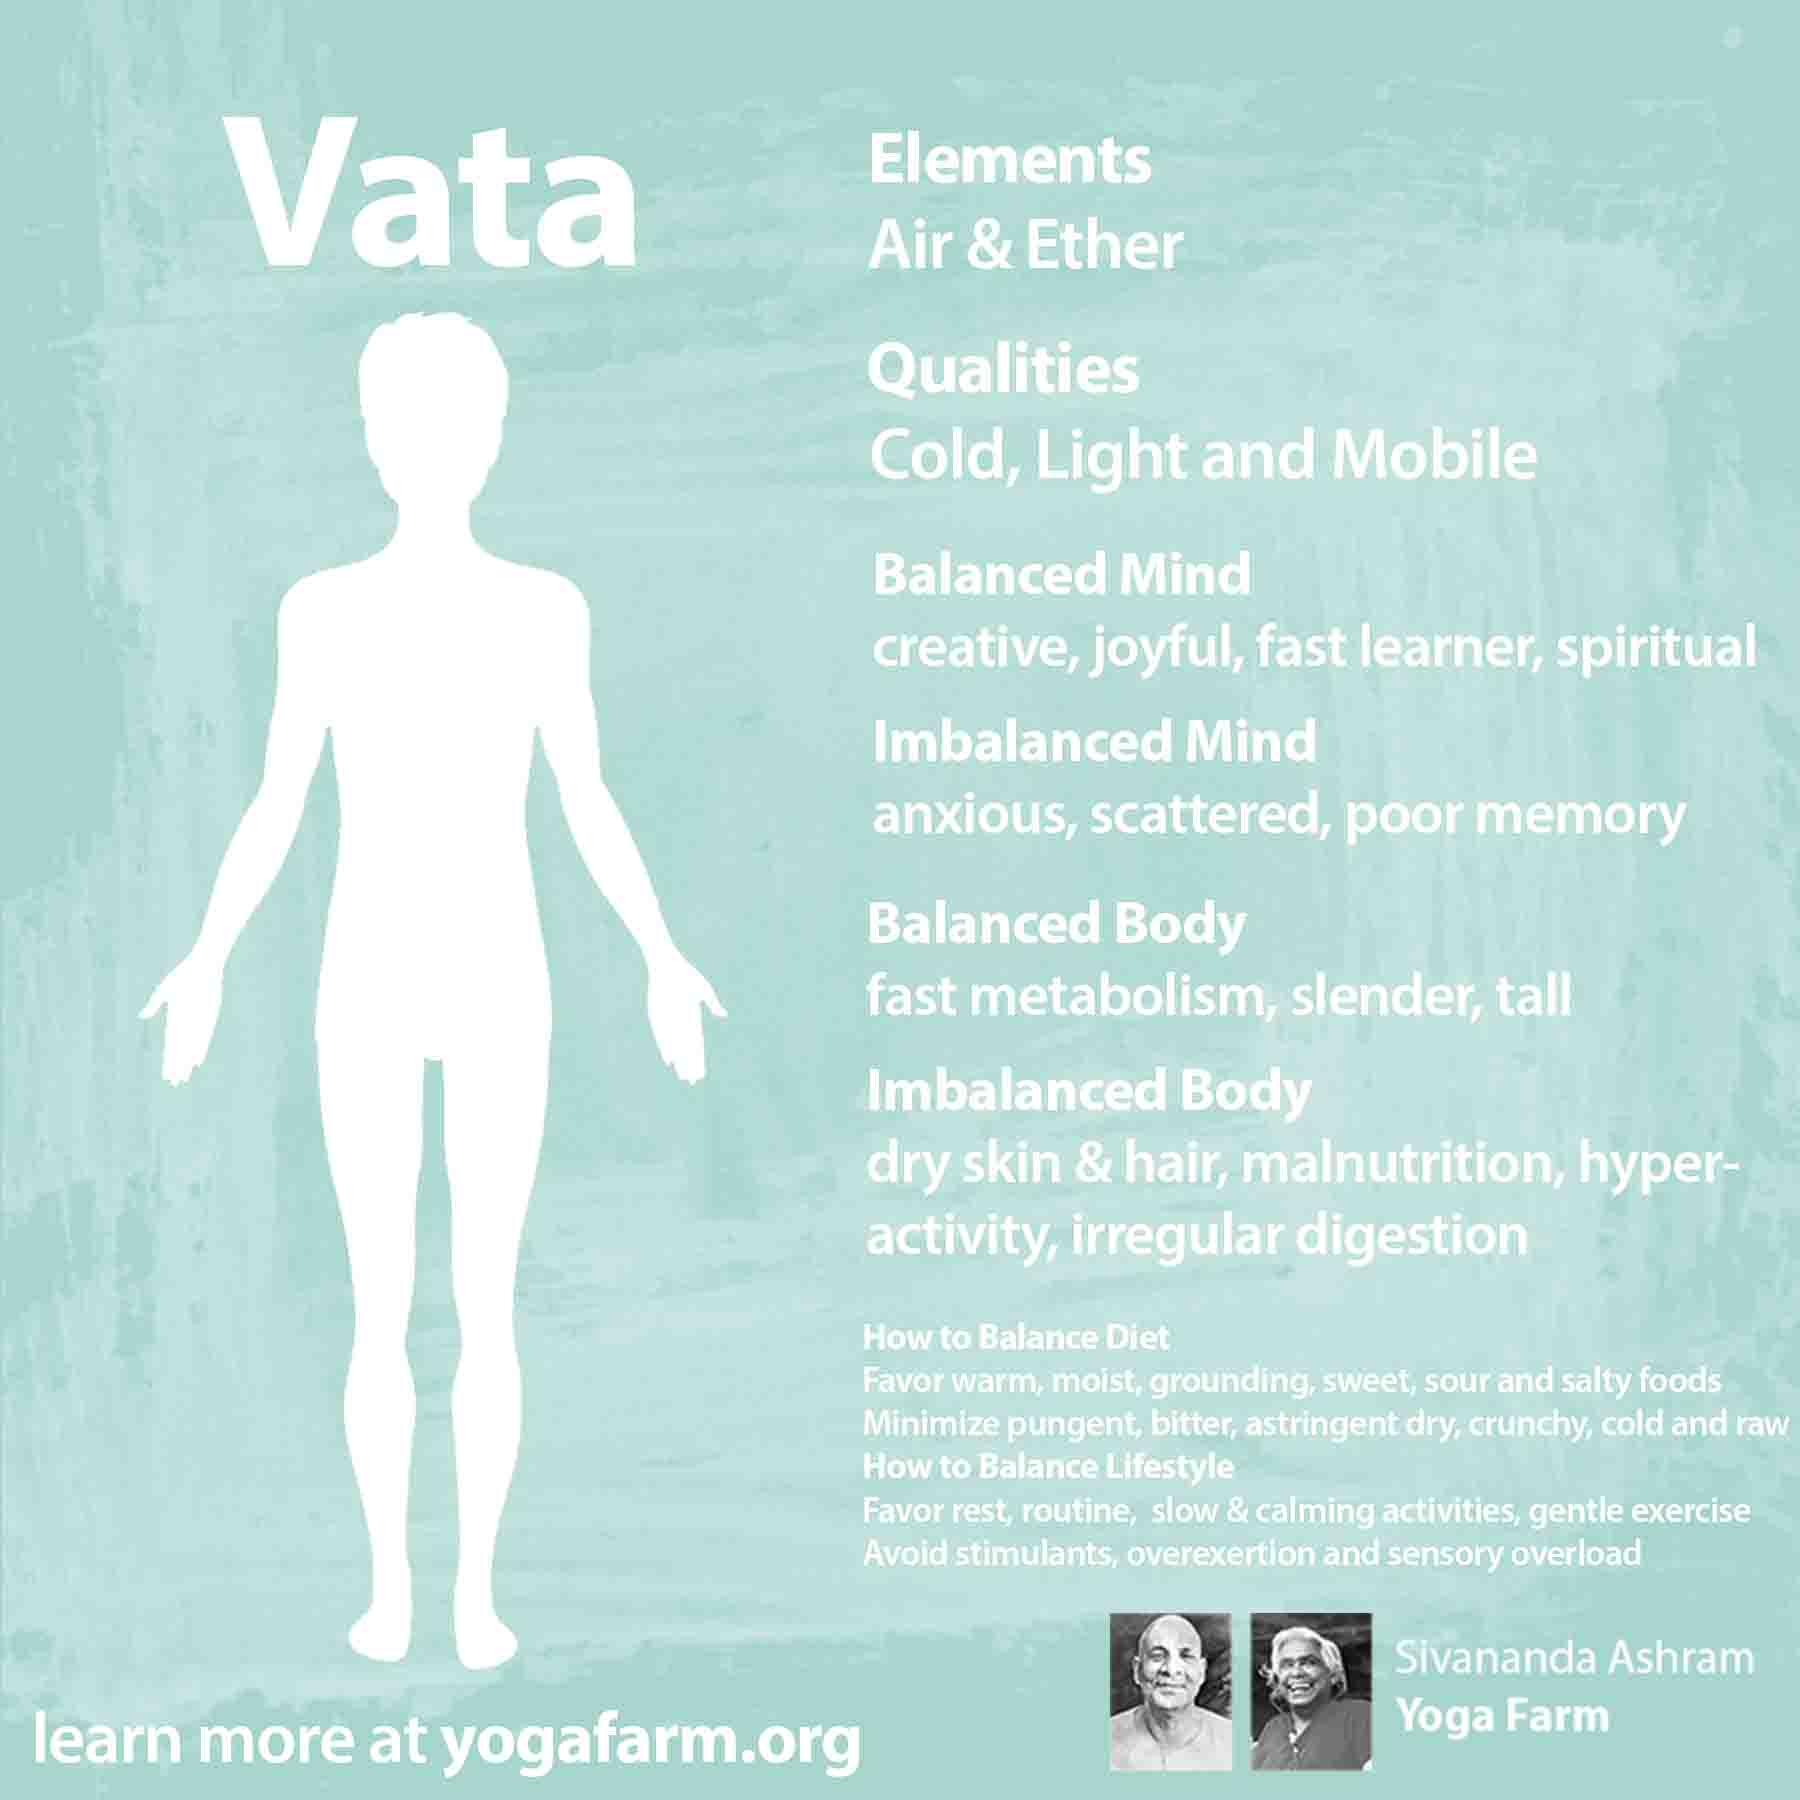 Graphic on the Elements and qualities of a person who is Vata